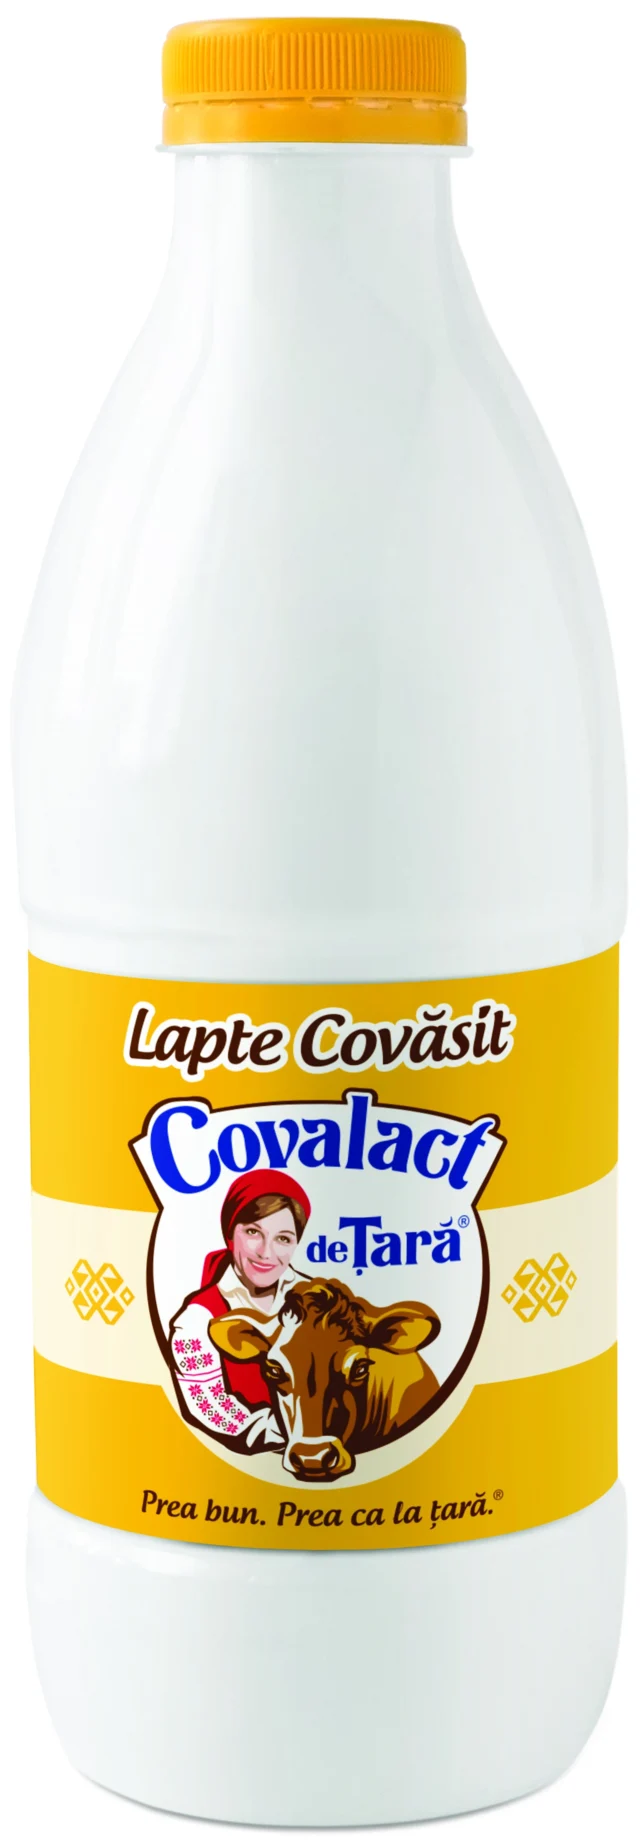 Lapte Covasit, COVALACT